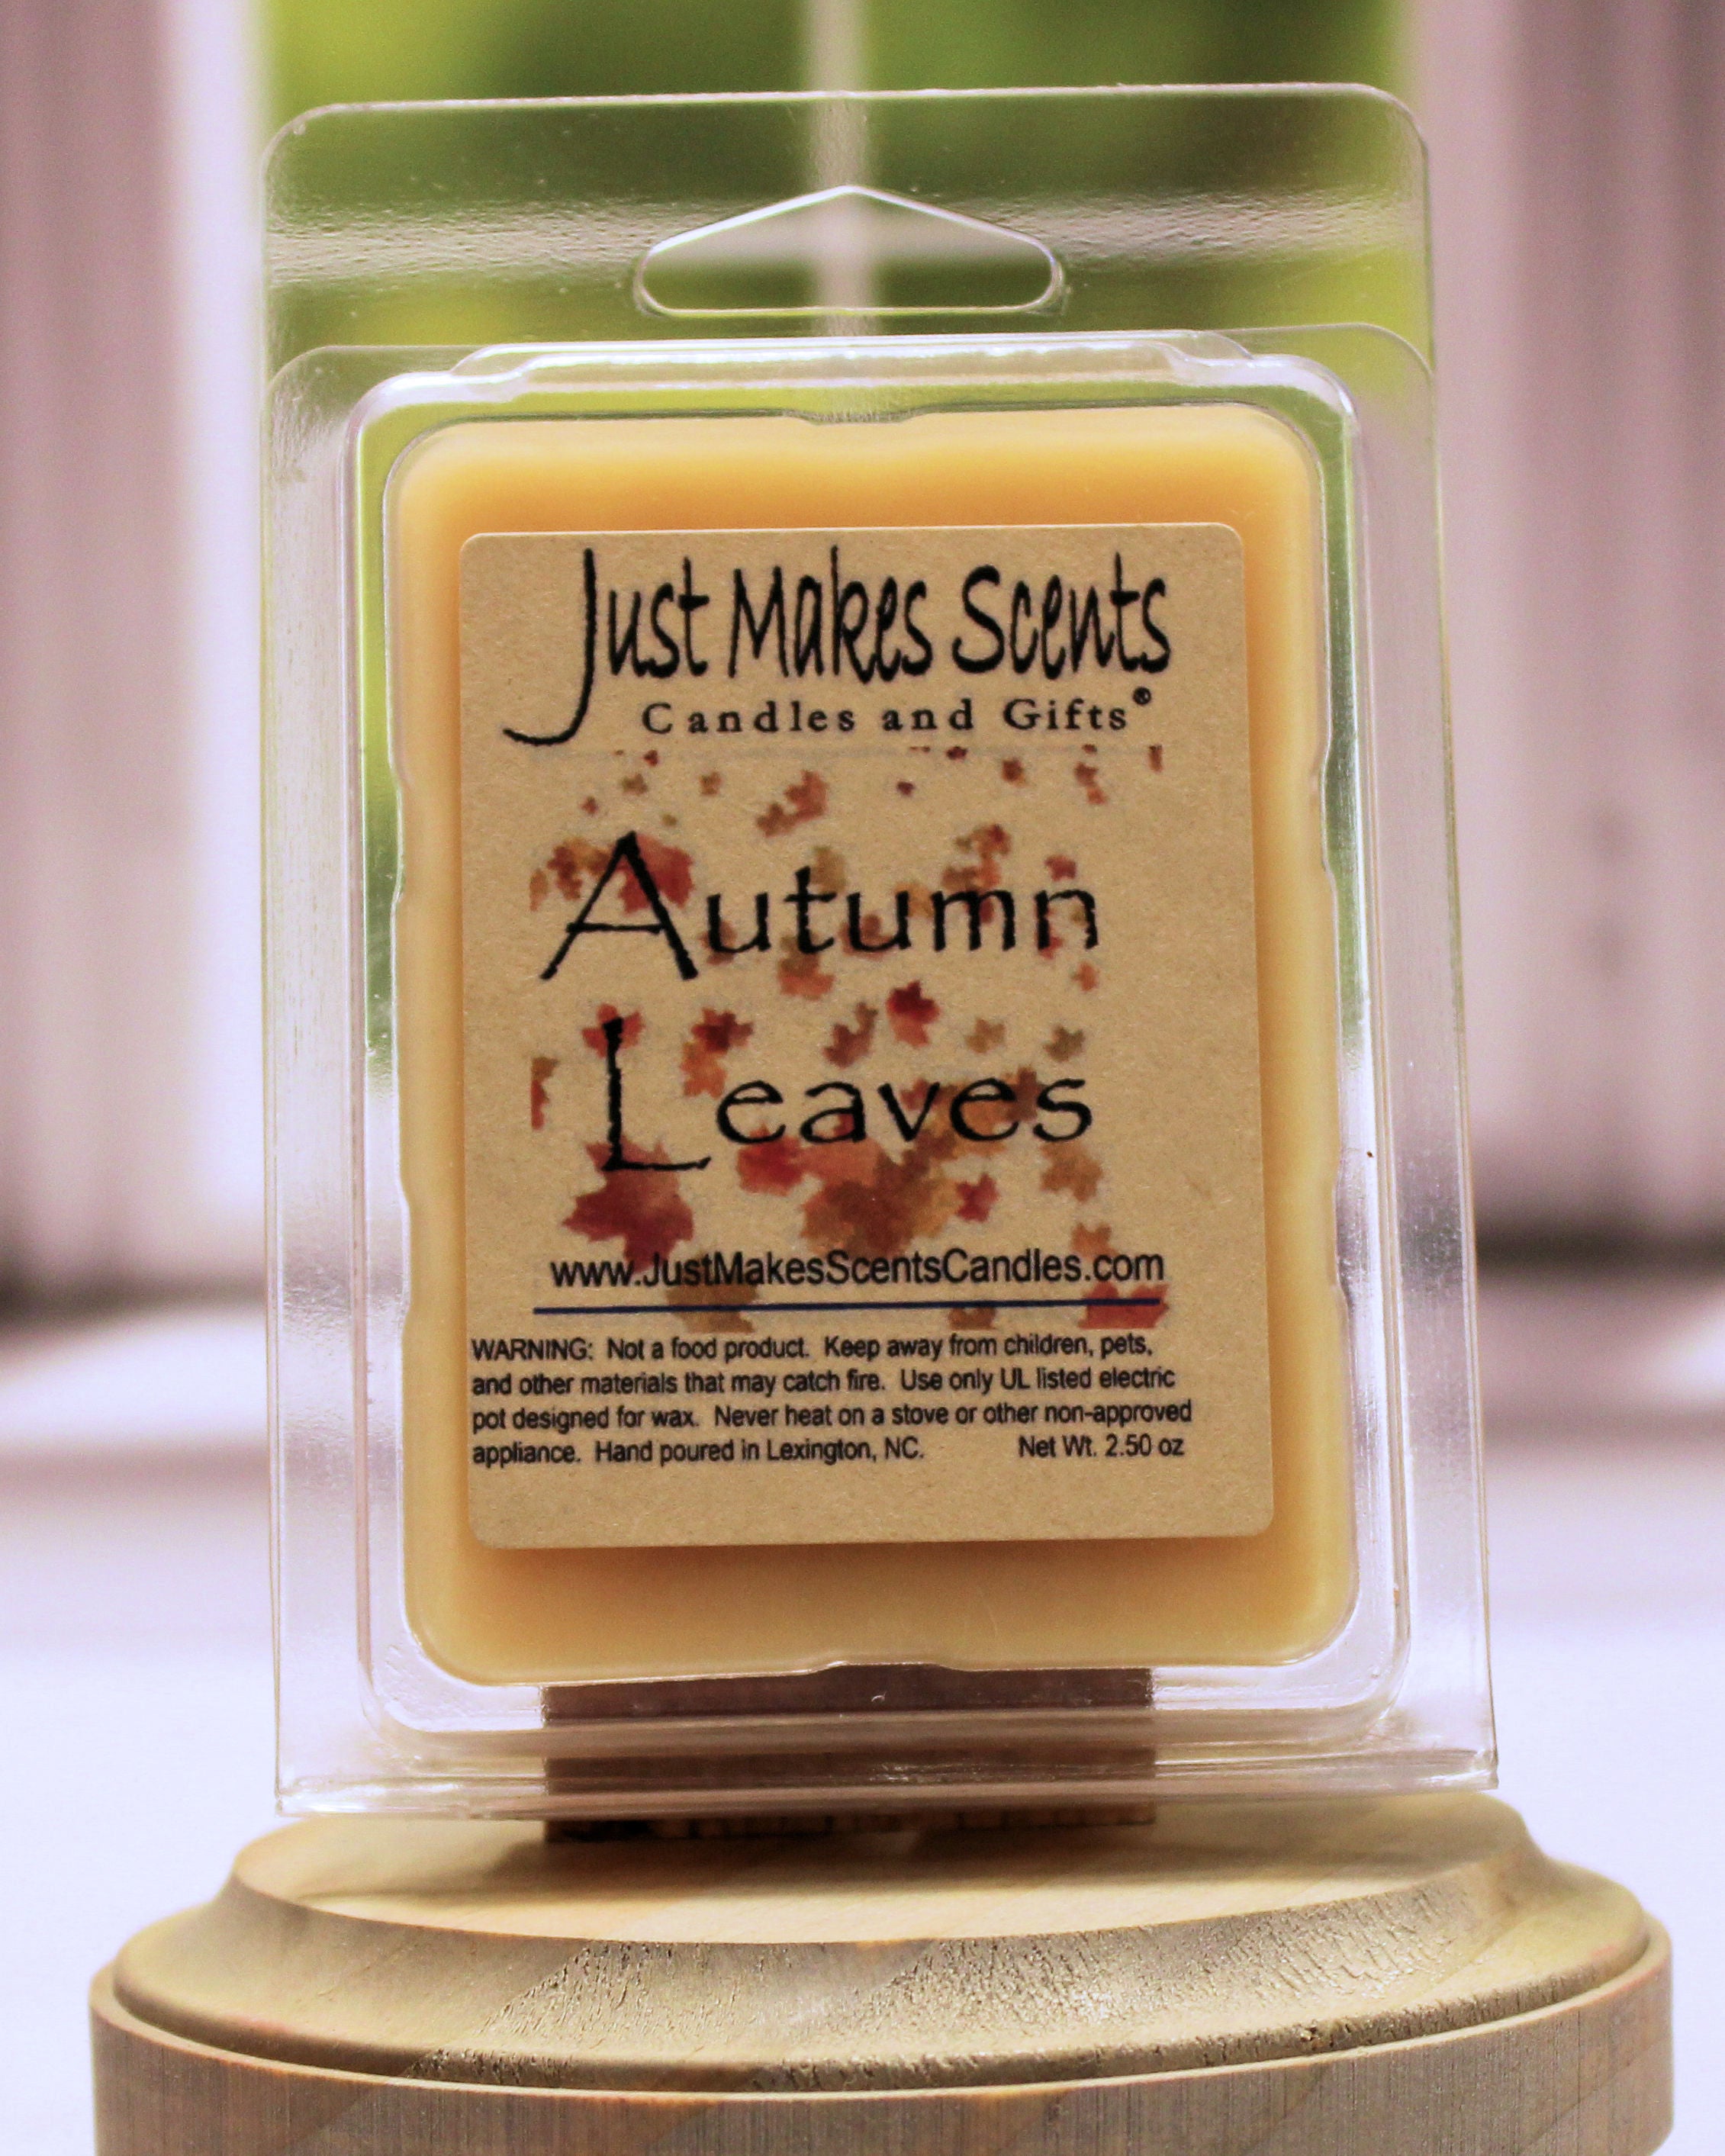 Autumn Leaves Scented Wax Melts